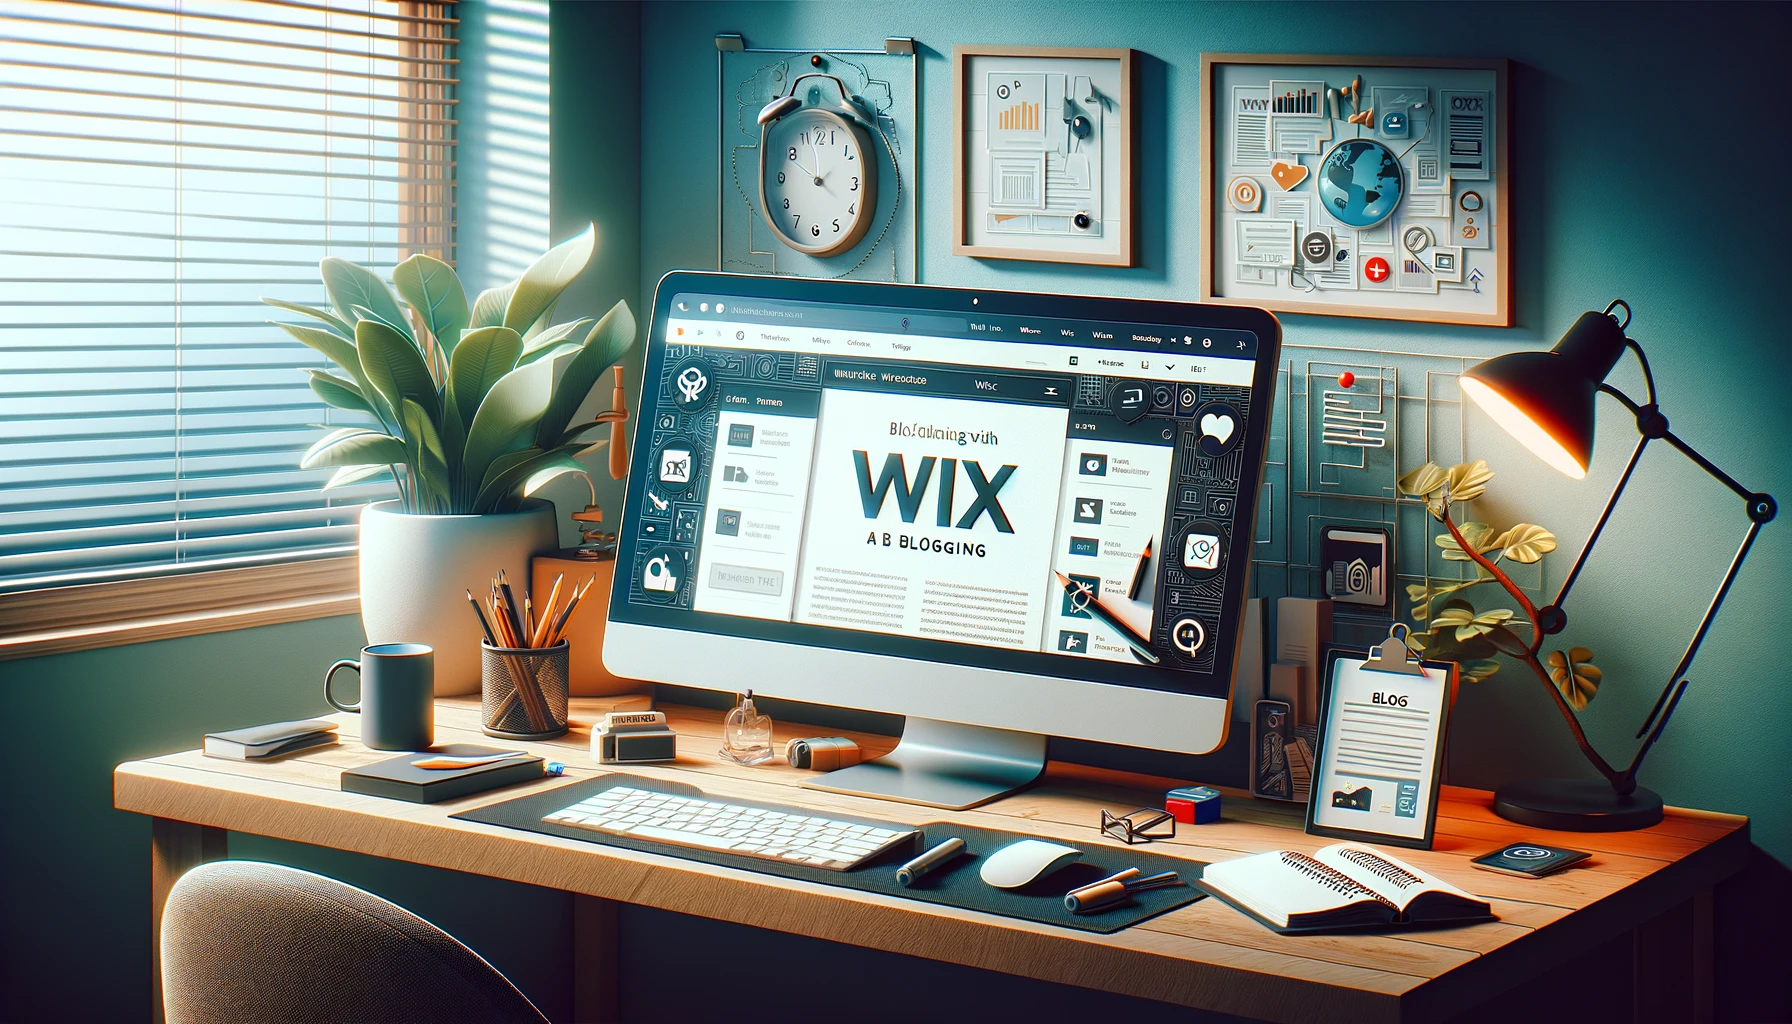 blogging with Wix Wix is Suitable for starting a blog, especially for beginners.